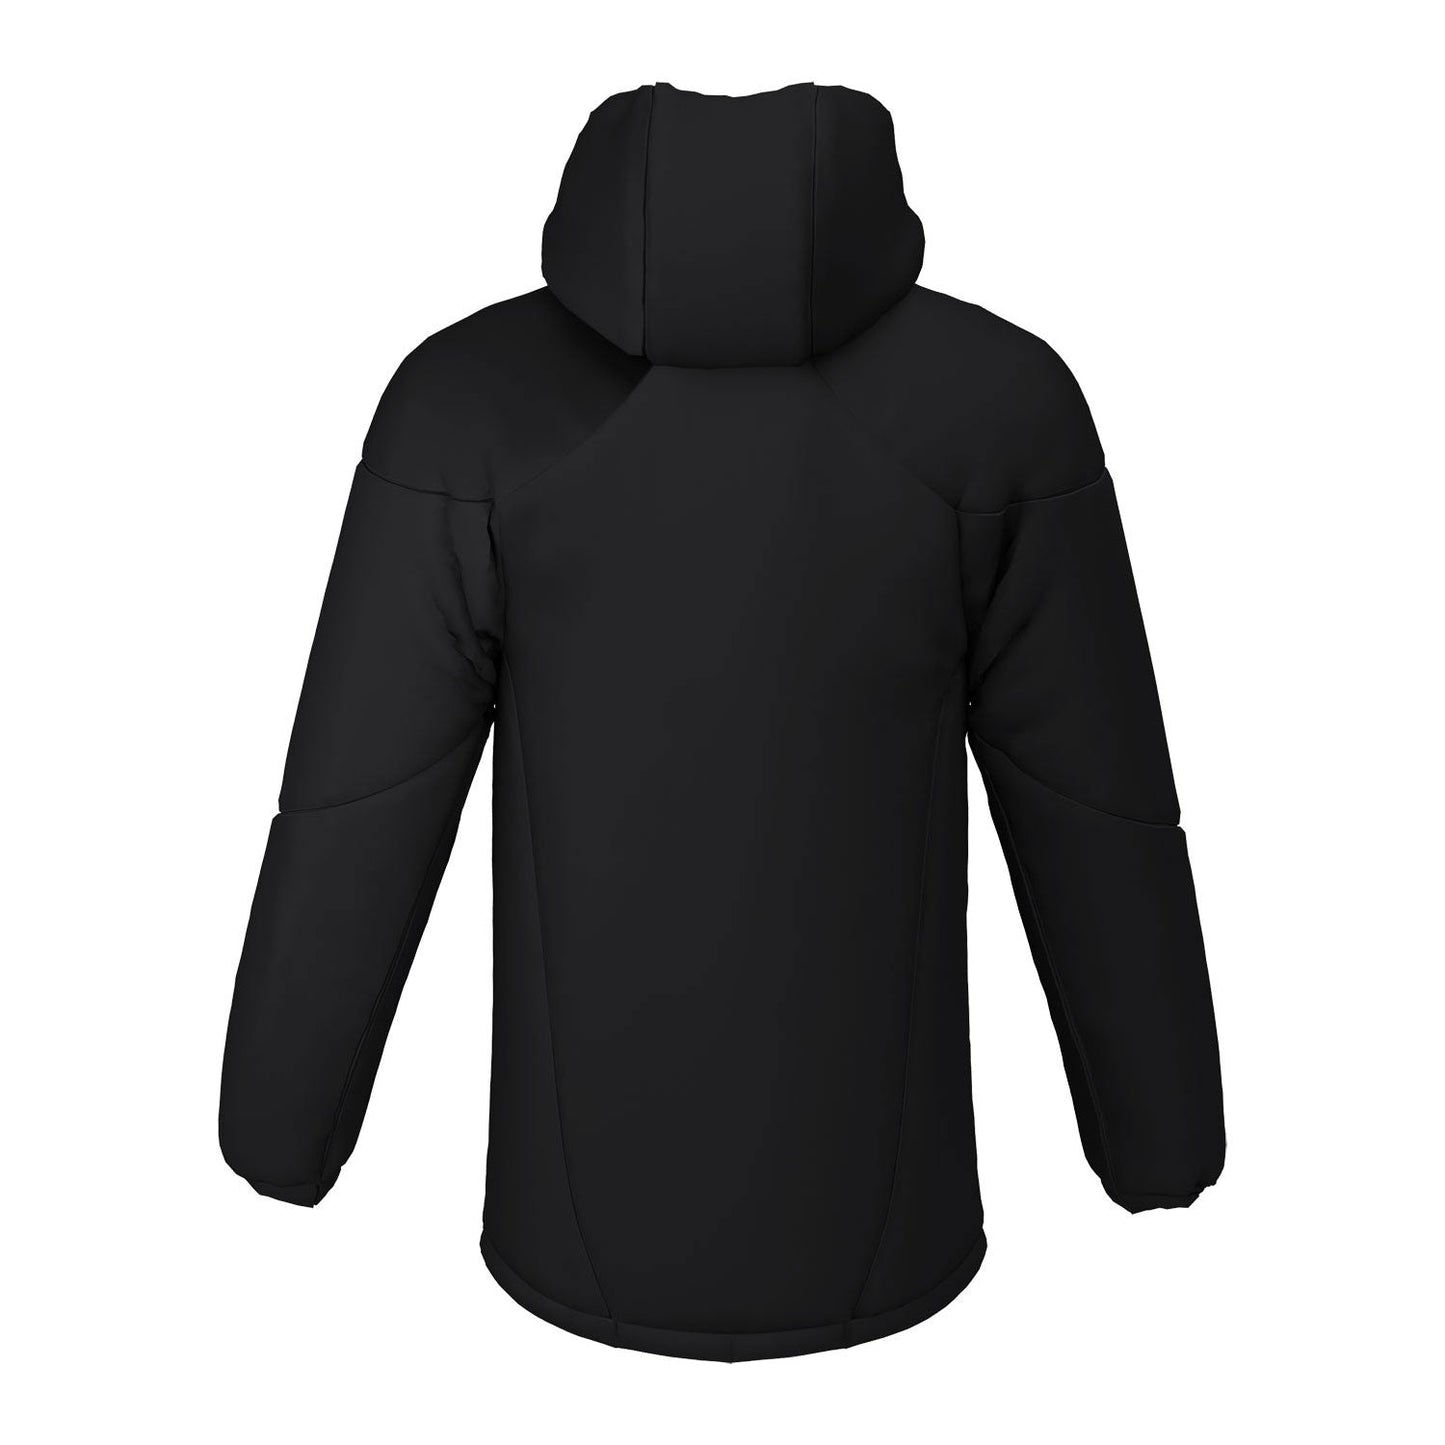 Plymouth ARC Contoured Thermal Jacket